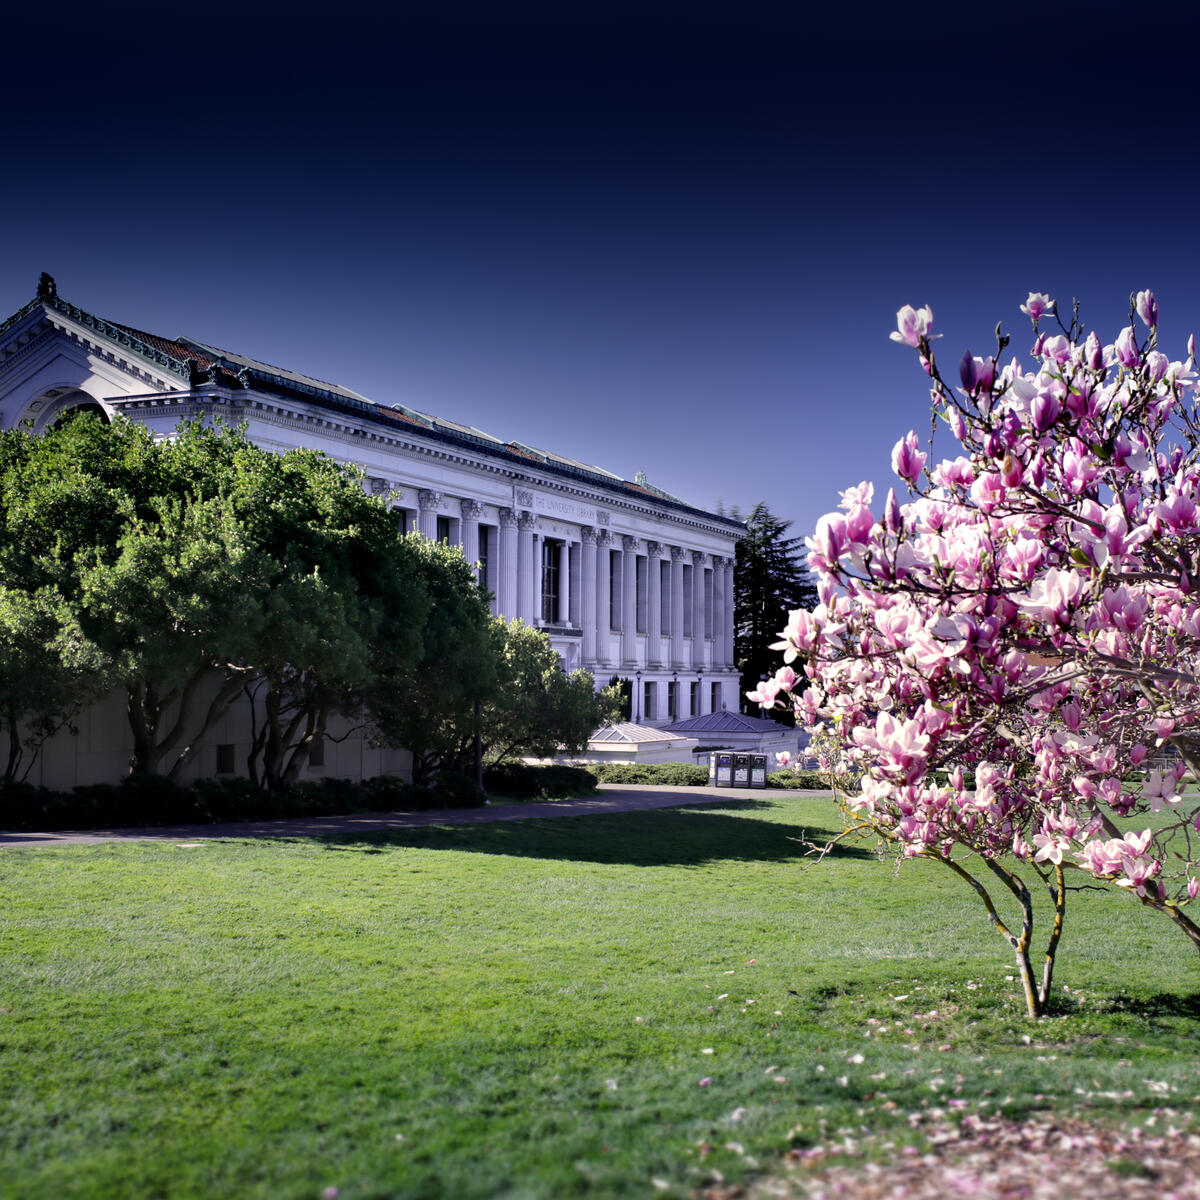 Decorative image of the Doe Library and a magnolia tree